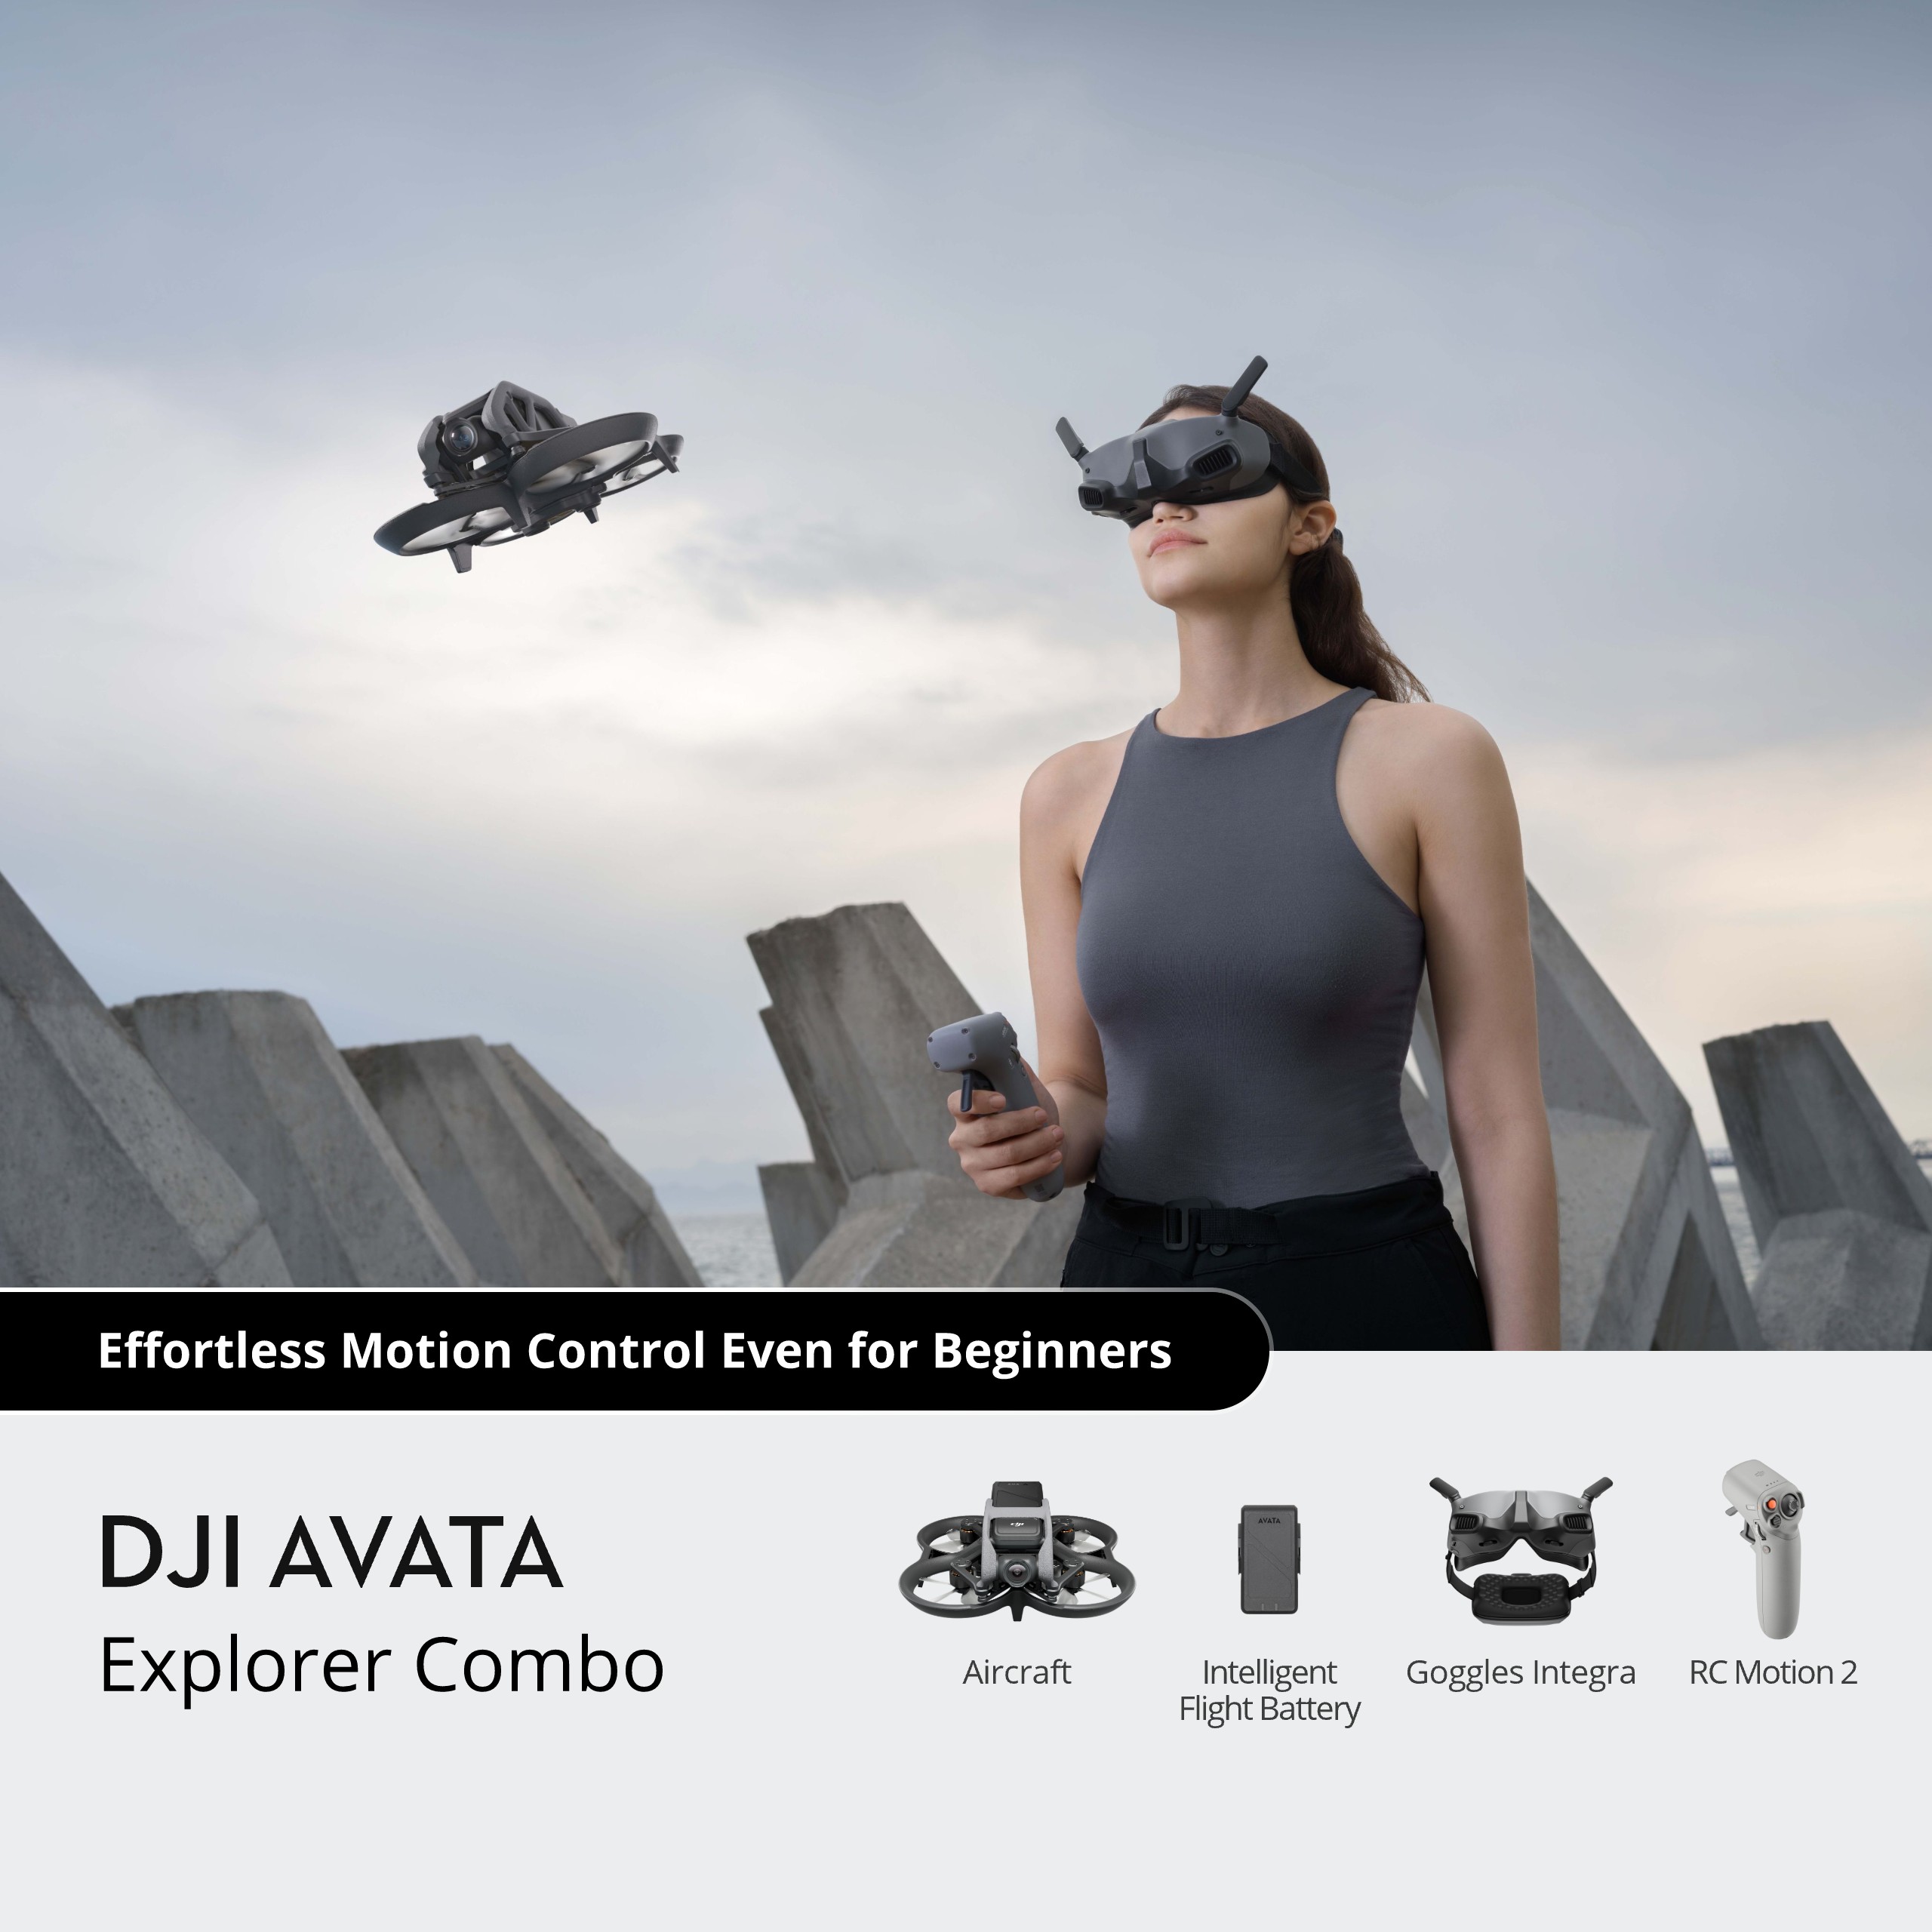 Is DJI Avata good for beginner FPV pilots?  Pros and cons